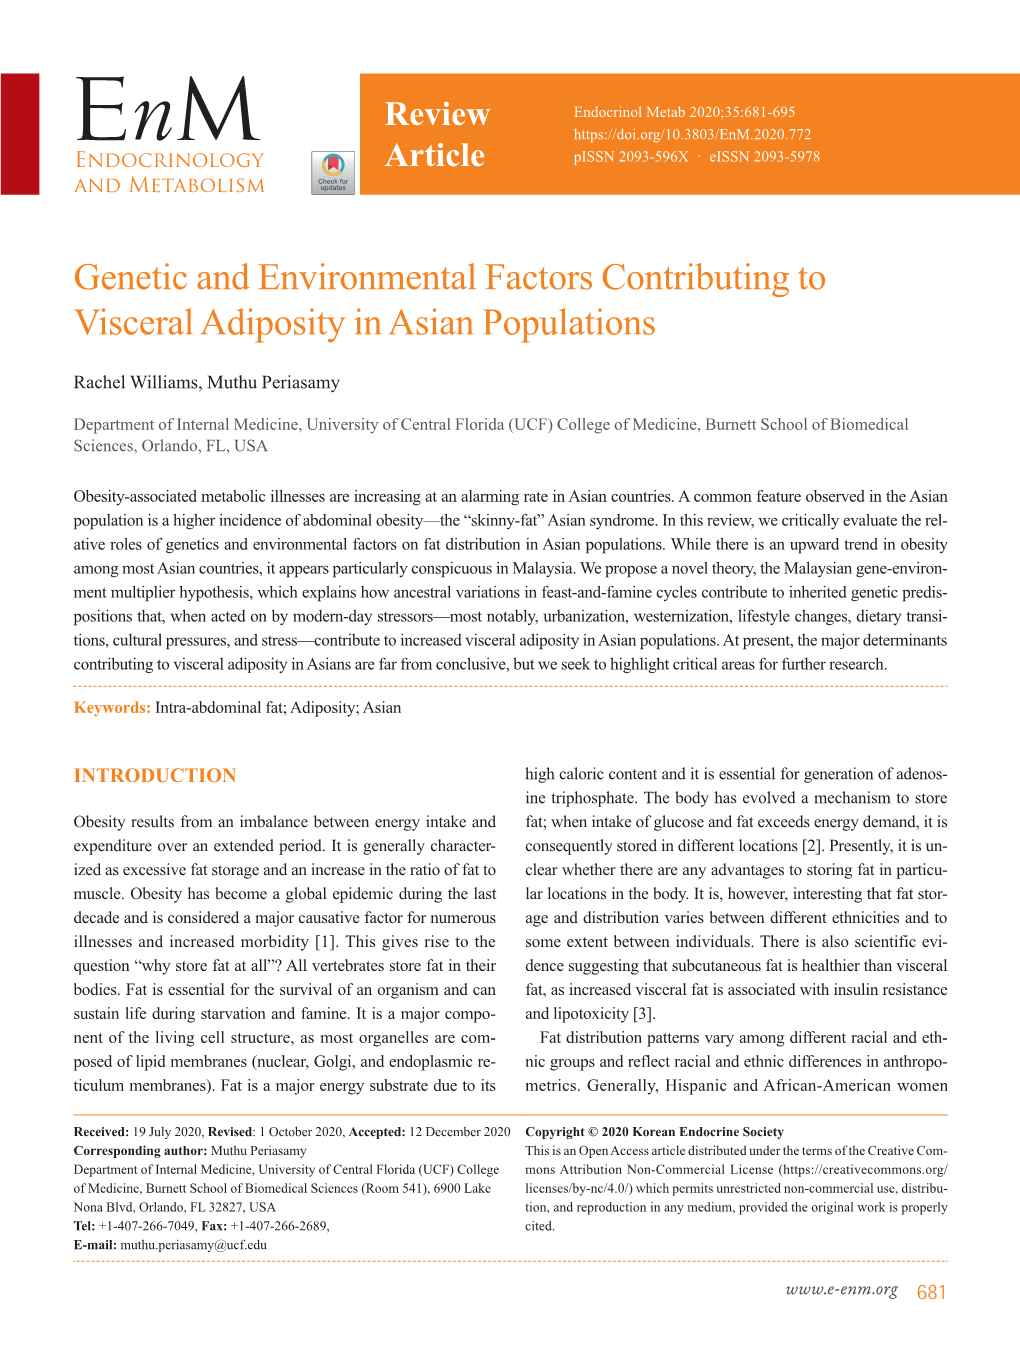 Genetic and Environmental Factors Contributing to Visceral Adiposity in Asian Populations